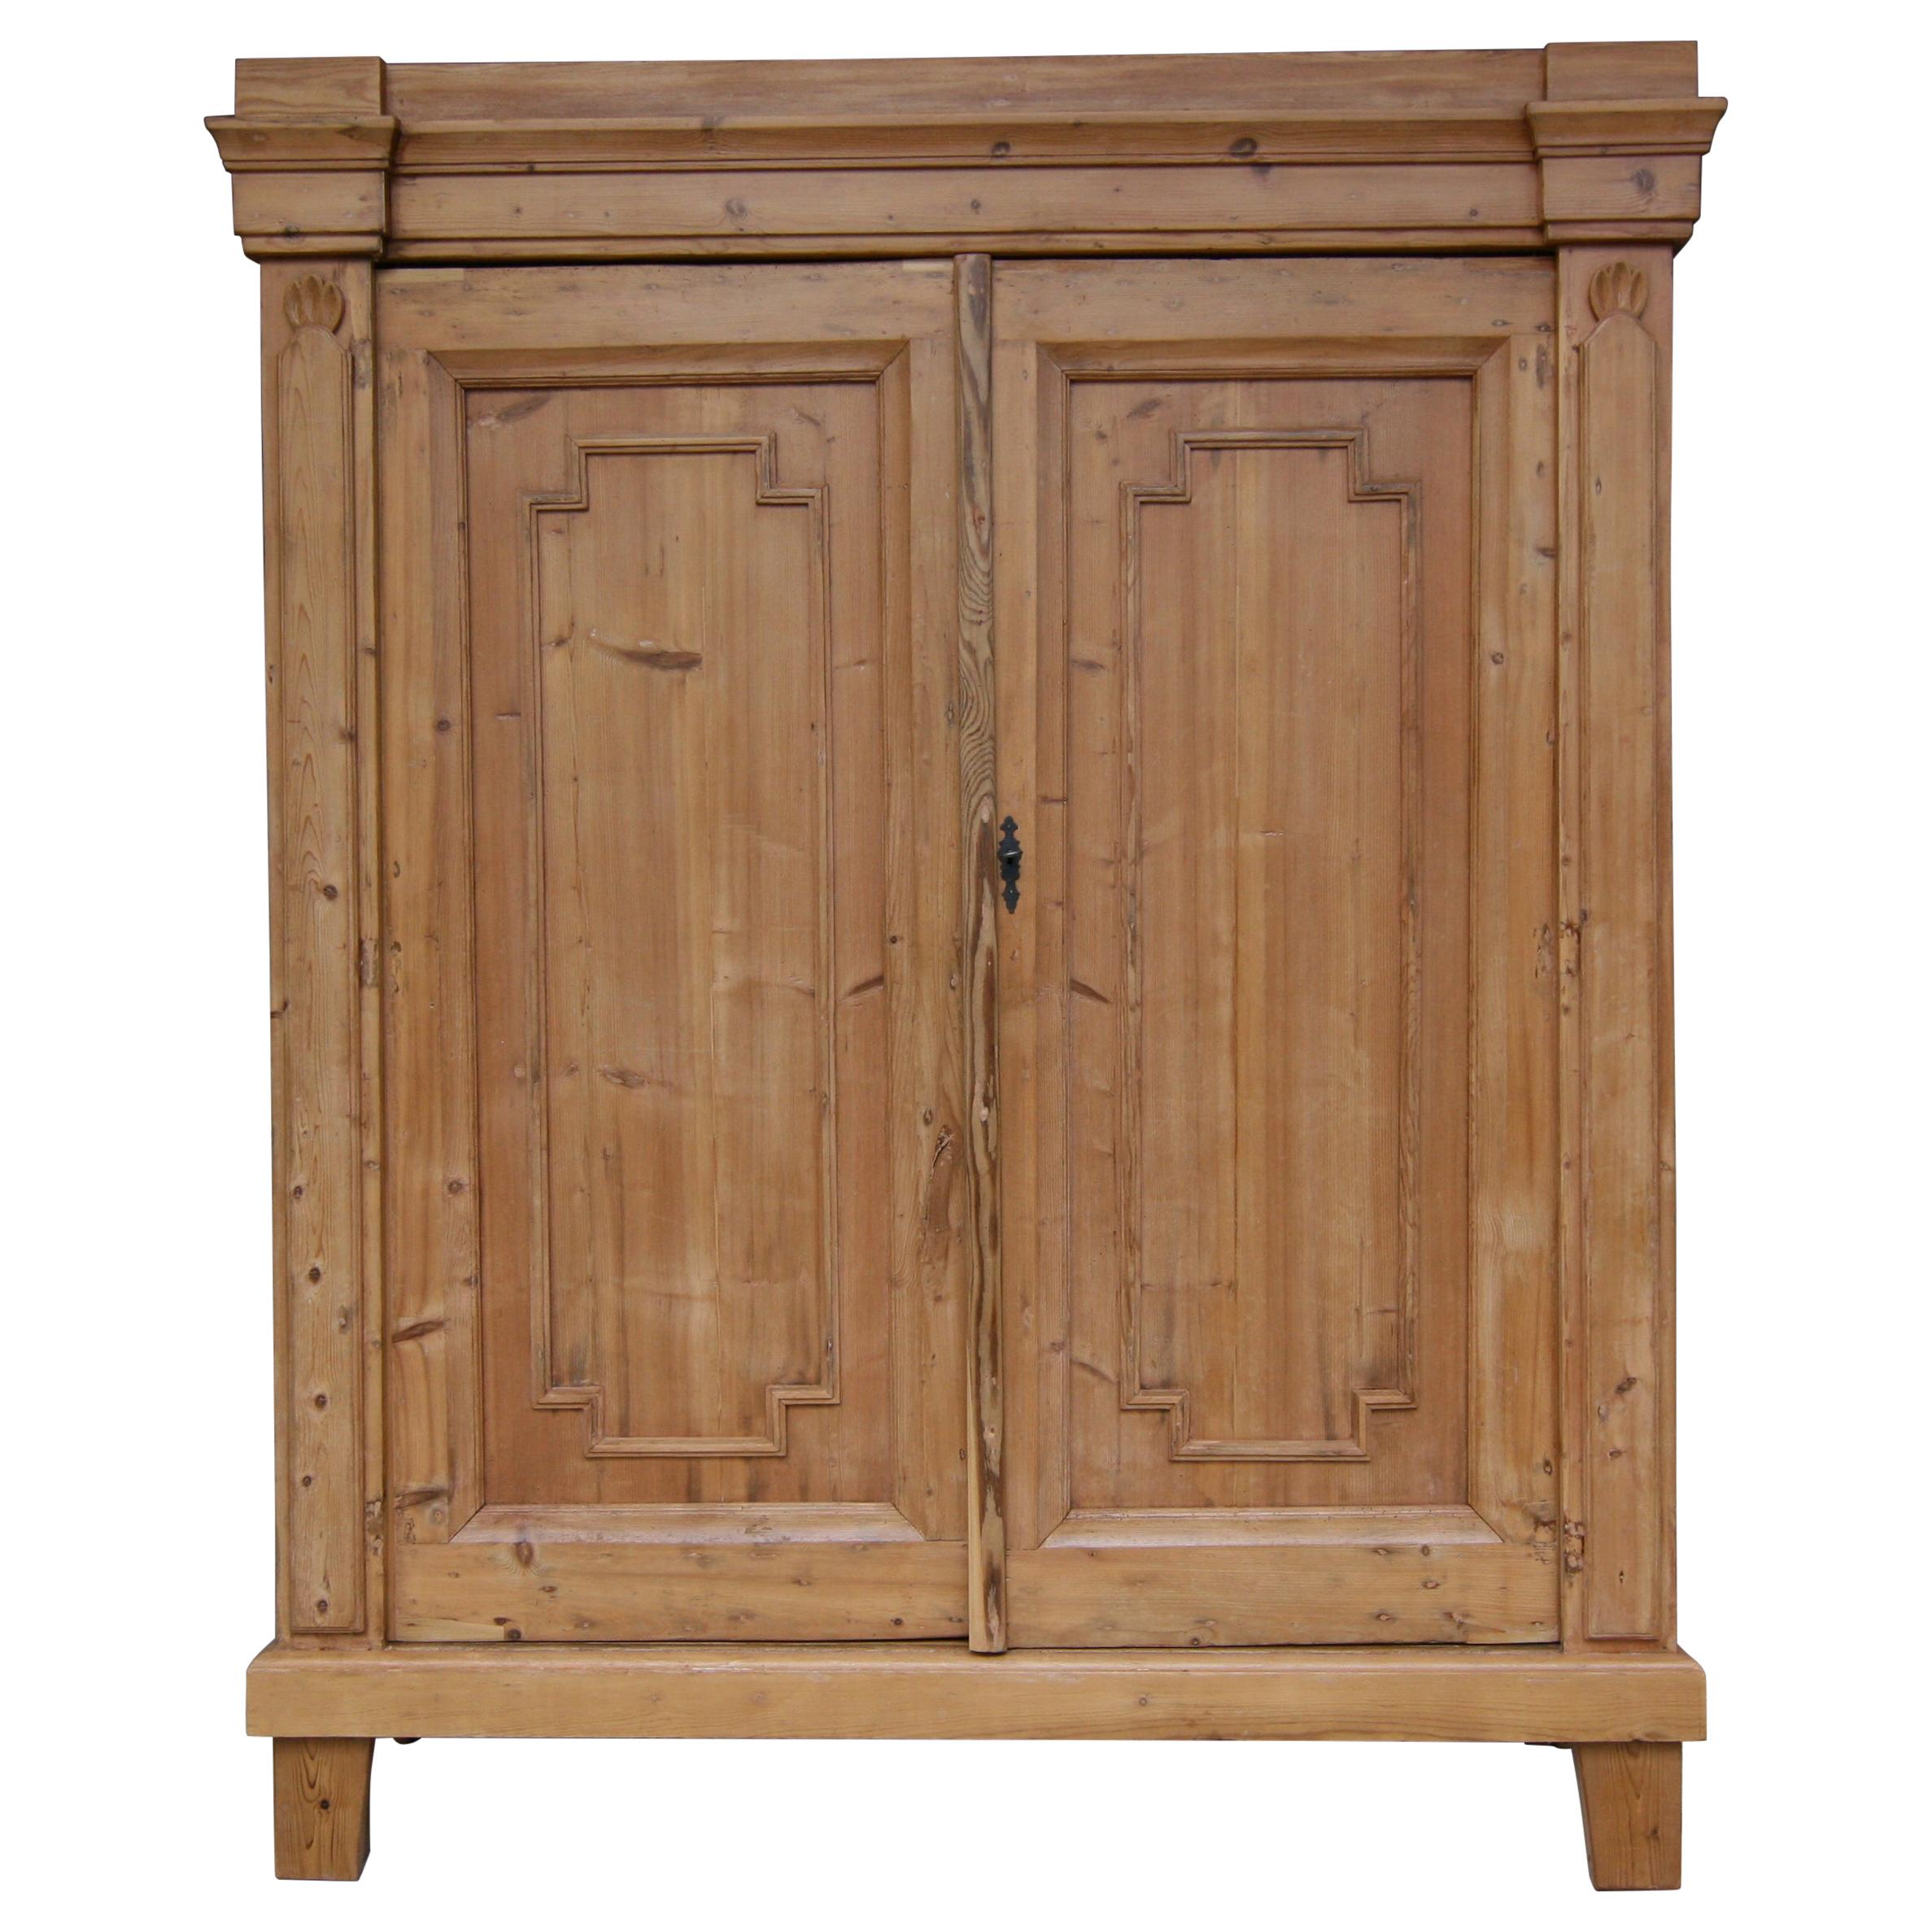 Early 19th Century German Provincial Cabinet made of Pine